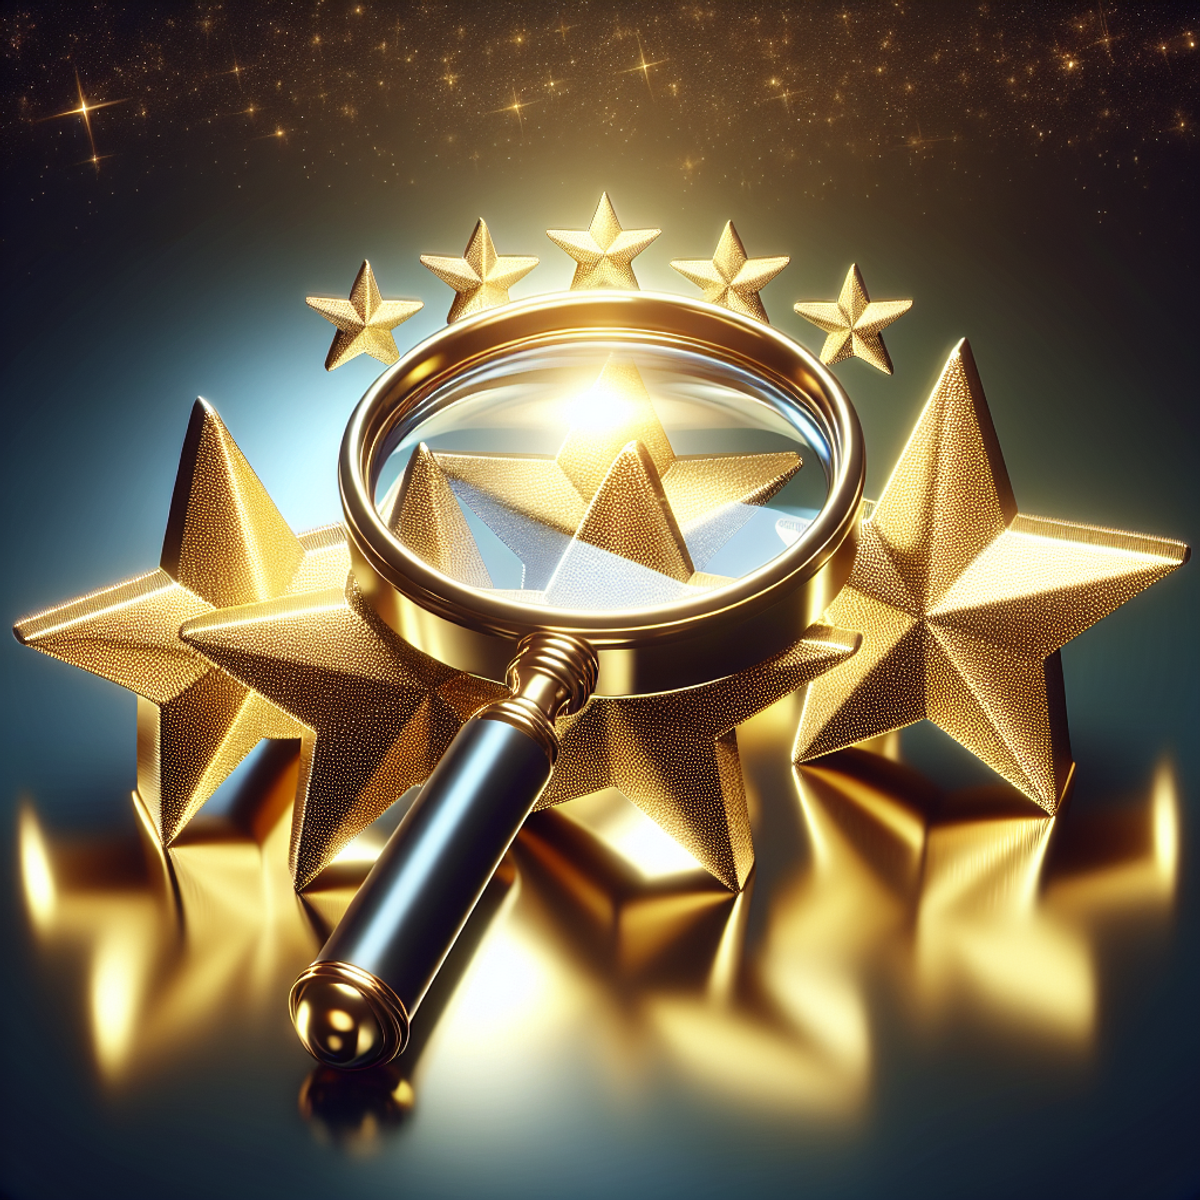 A golden magnifying glass hovers over five radiant gold star ratings, symbolizing scrutiny and customer satisfaction.